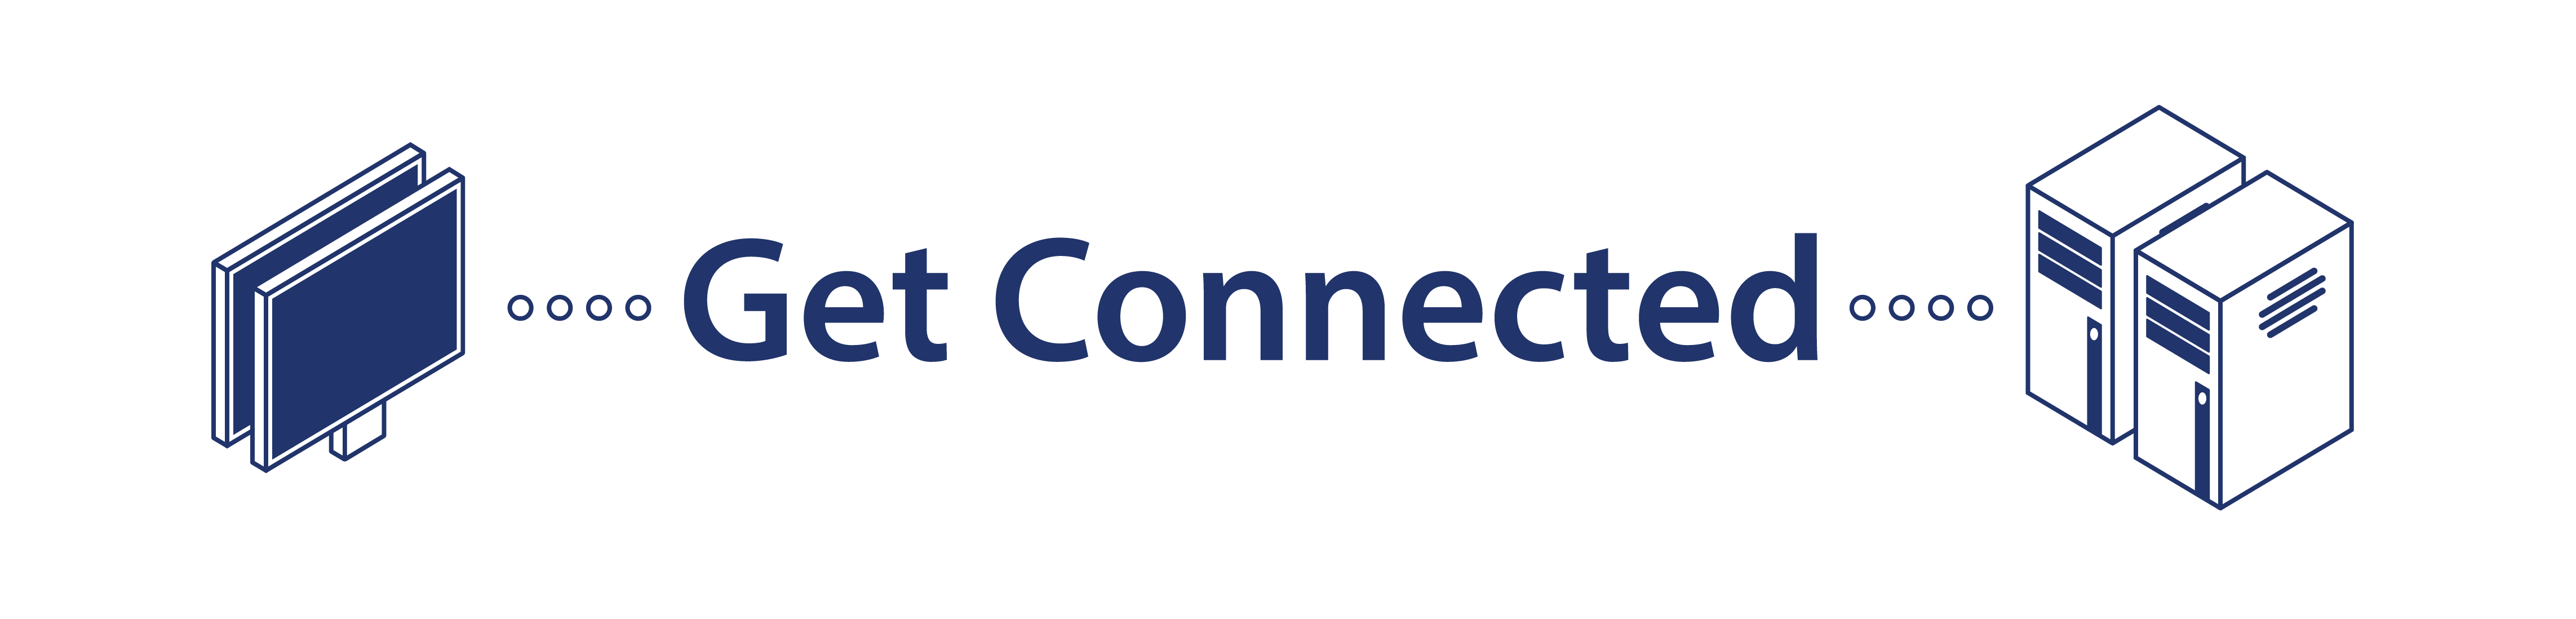 get_connected_logo